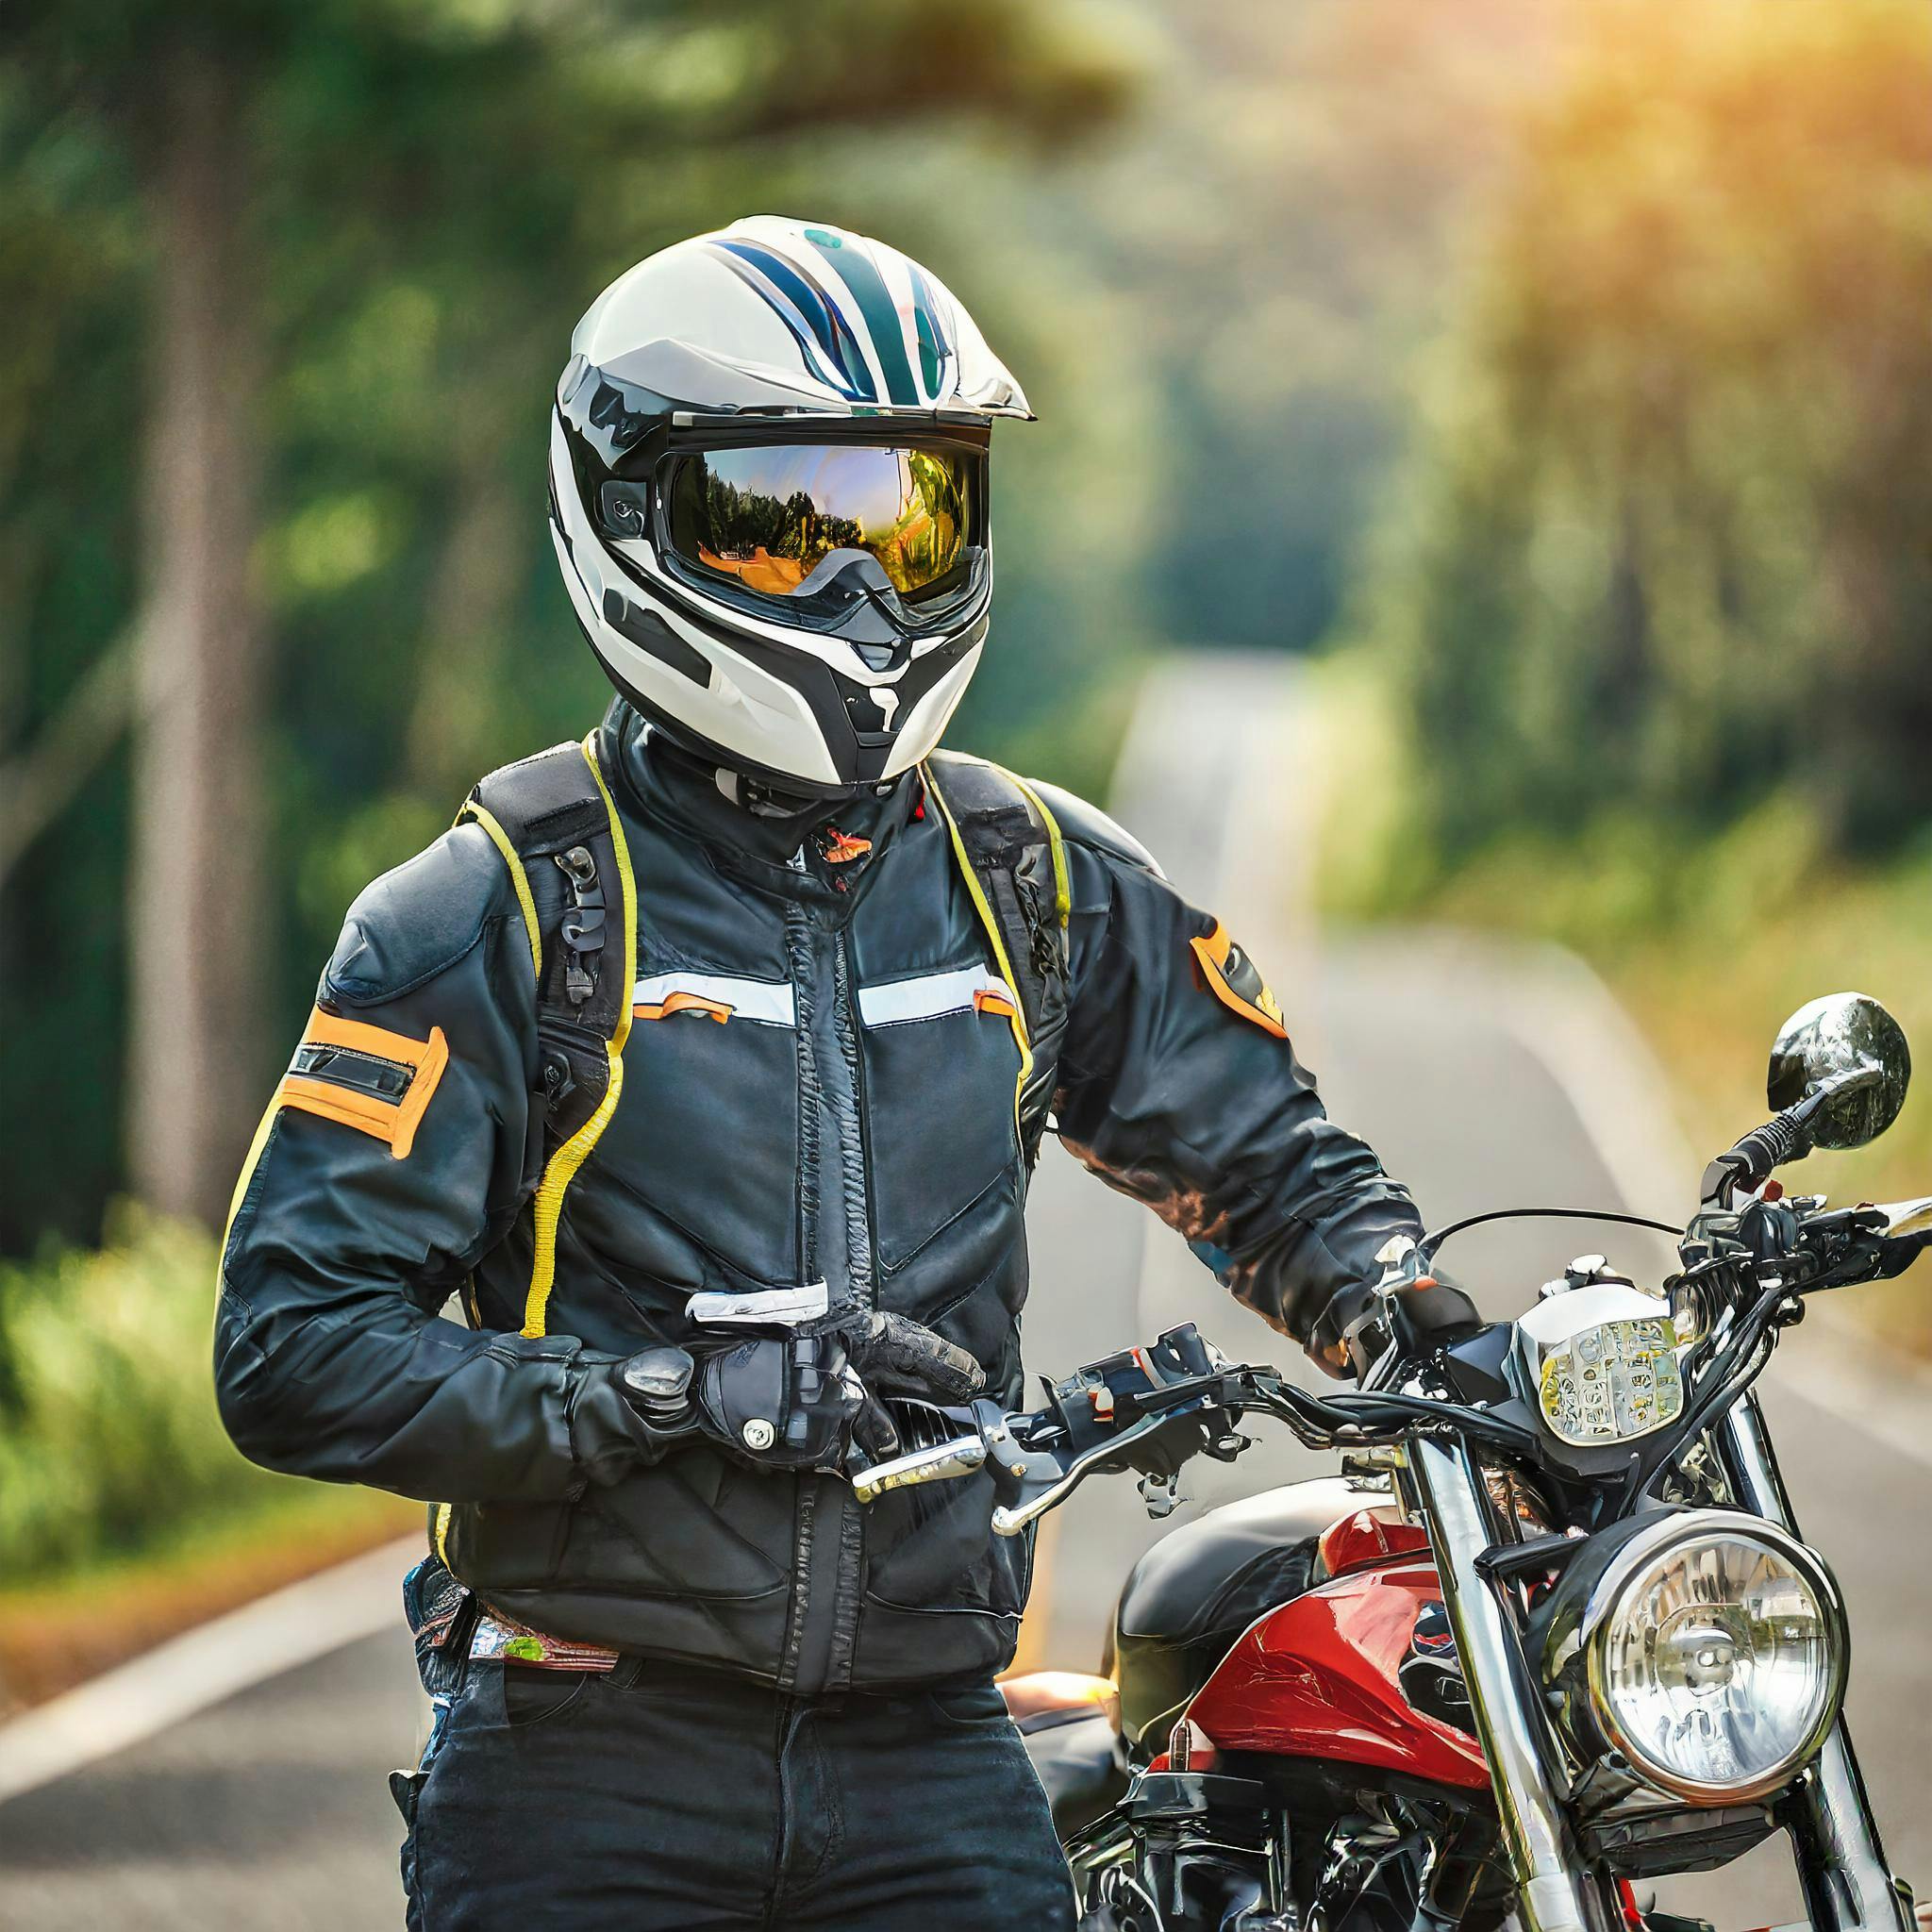 motorcycle rider with protective gear - helmet, gloves, leather jacket motorcycle safety gear